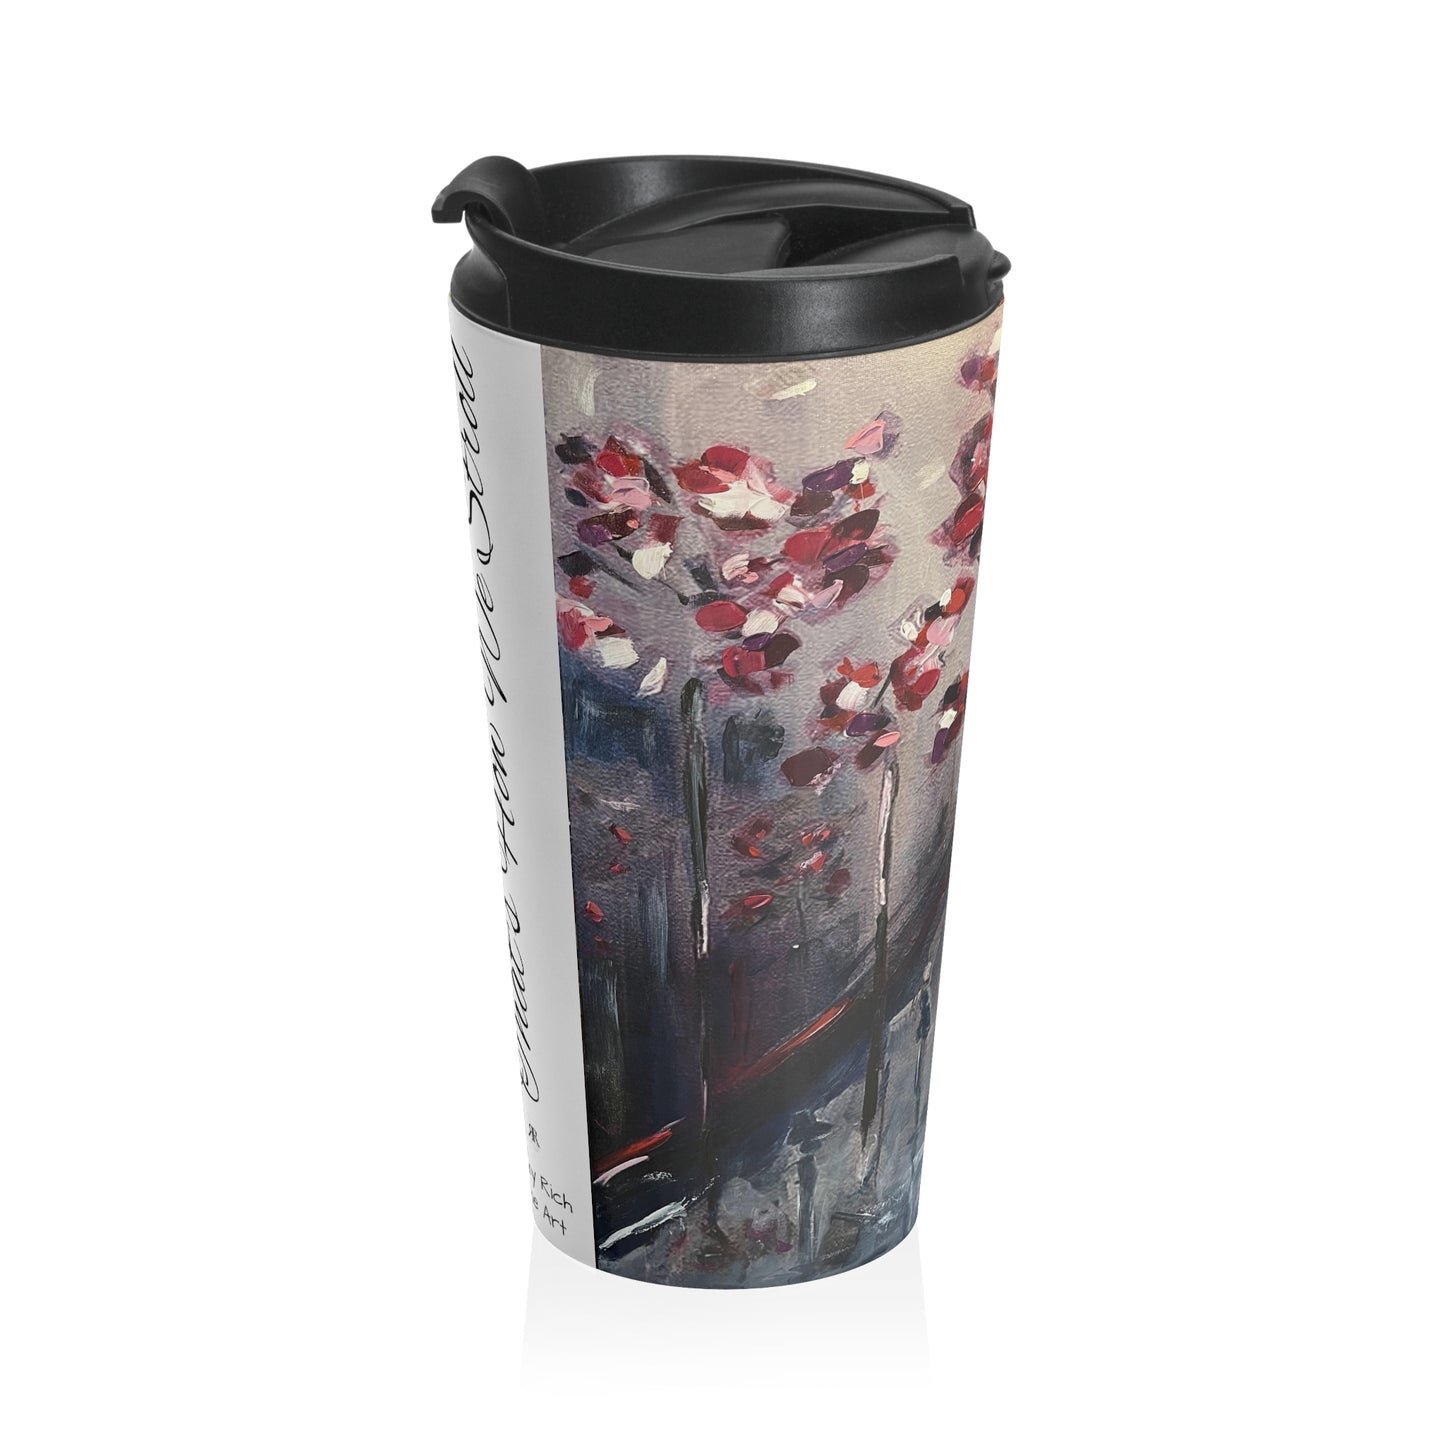 "That's How We Stroll" Strolling in Paris Romantic Stainless Steel Travel Mug